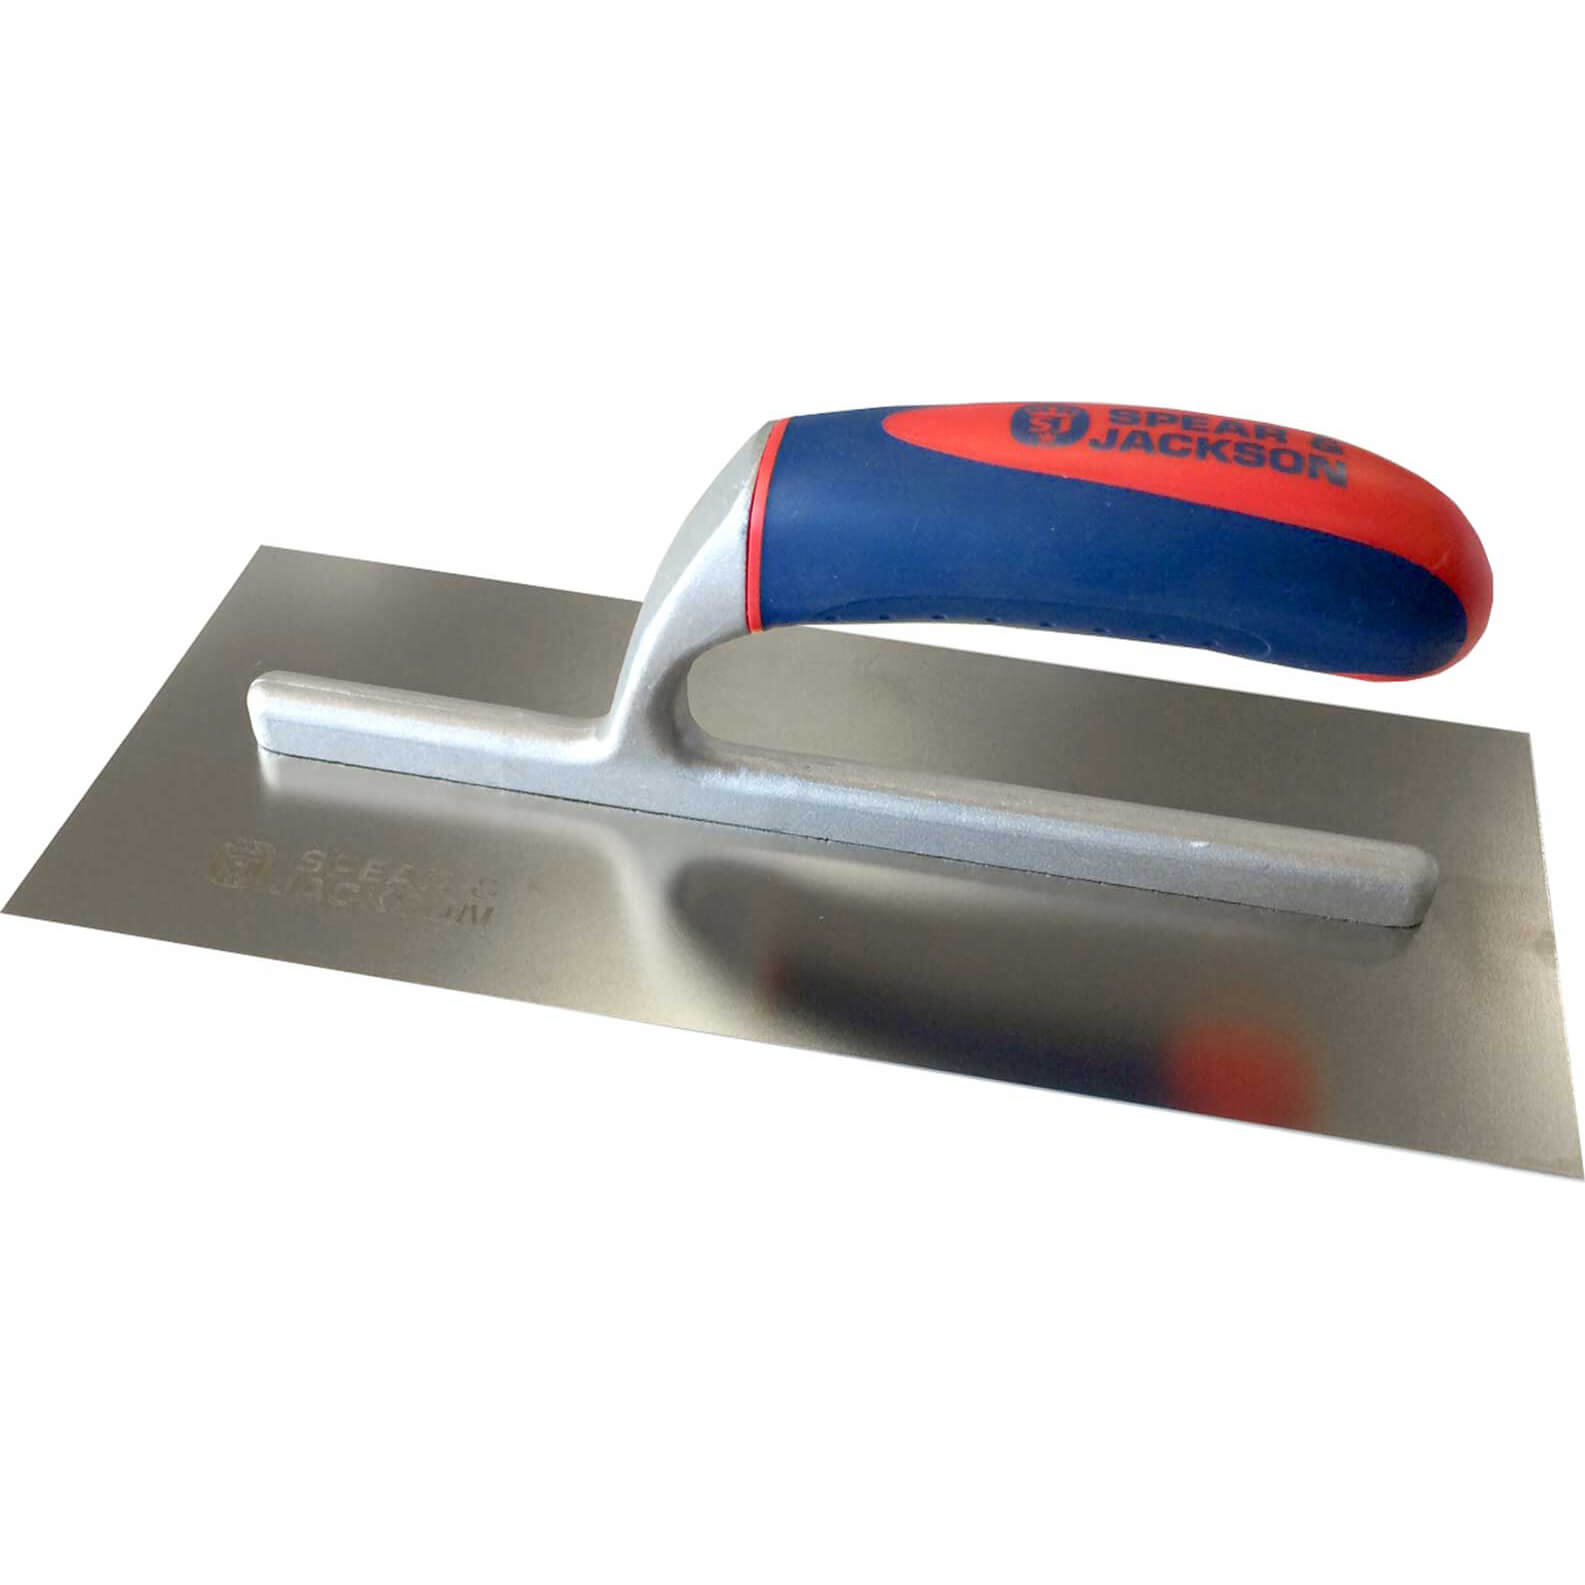 Photo of Spear And Jackson Stainless Steel Plastering Trowel 11